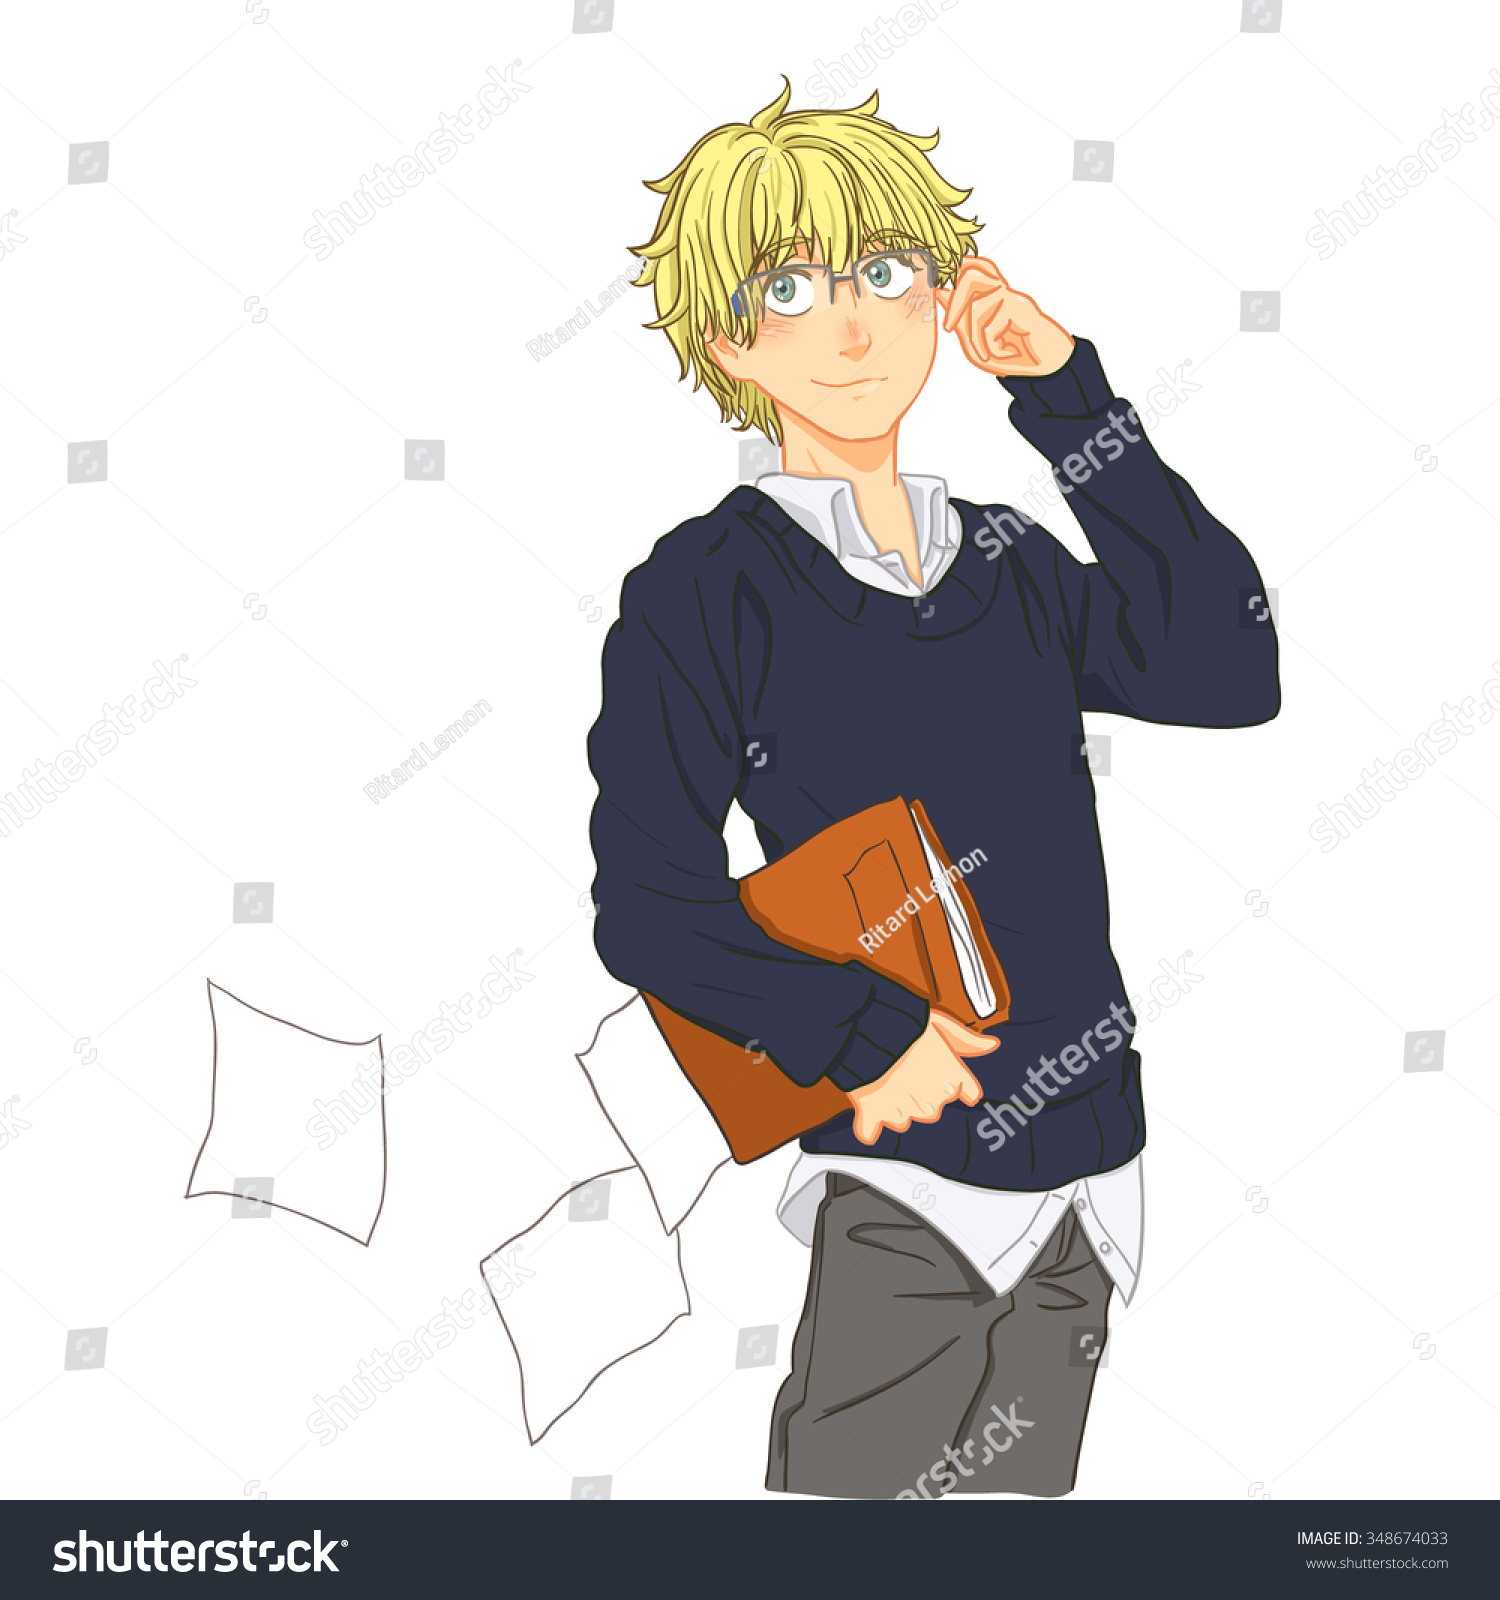 Anime Boy With Blonde Hair | Uphairstyle